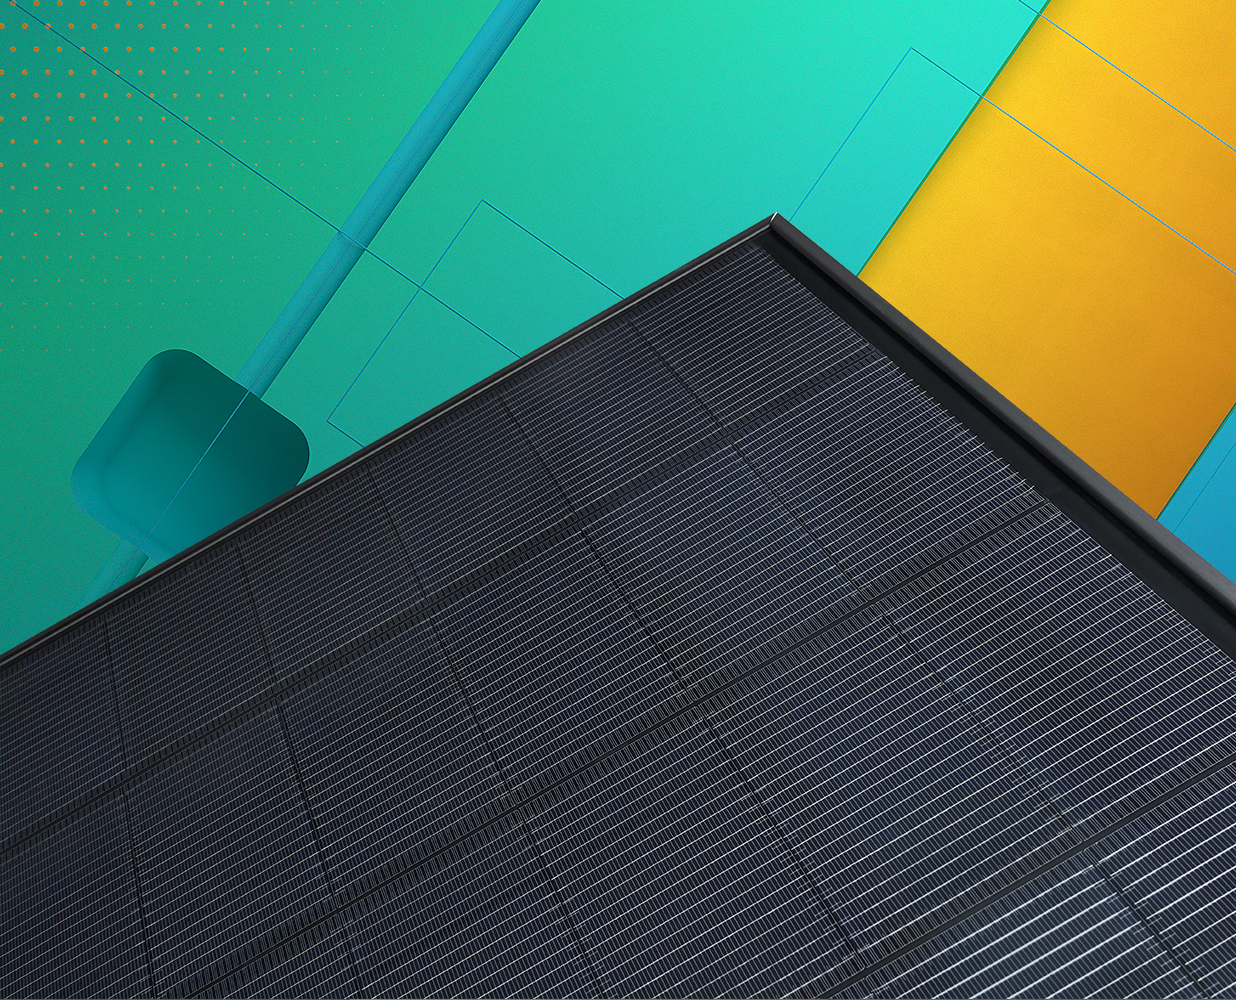 Bottom corner of an REC Alpha Pure R solar panel with an abstract green, blue and yellow graphic background.